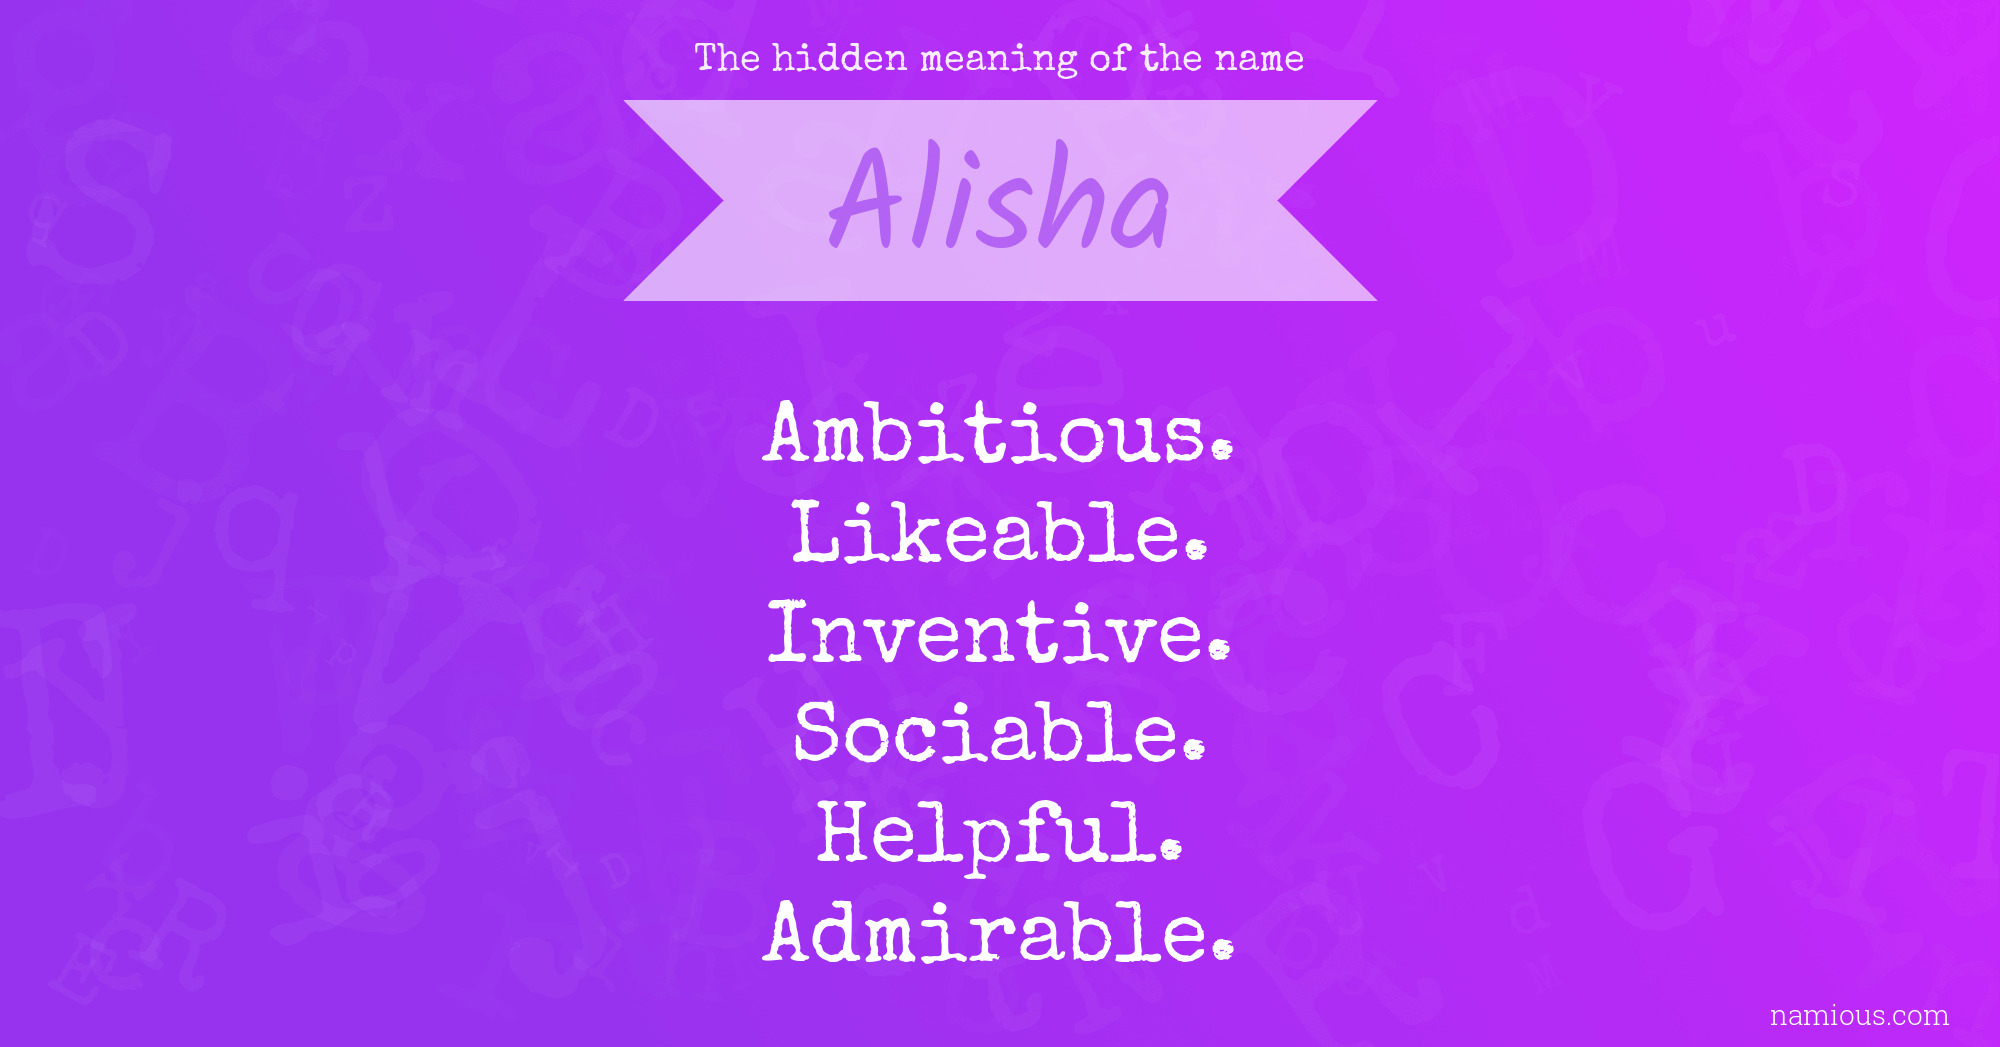 The hidden meaning of the name Alisha